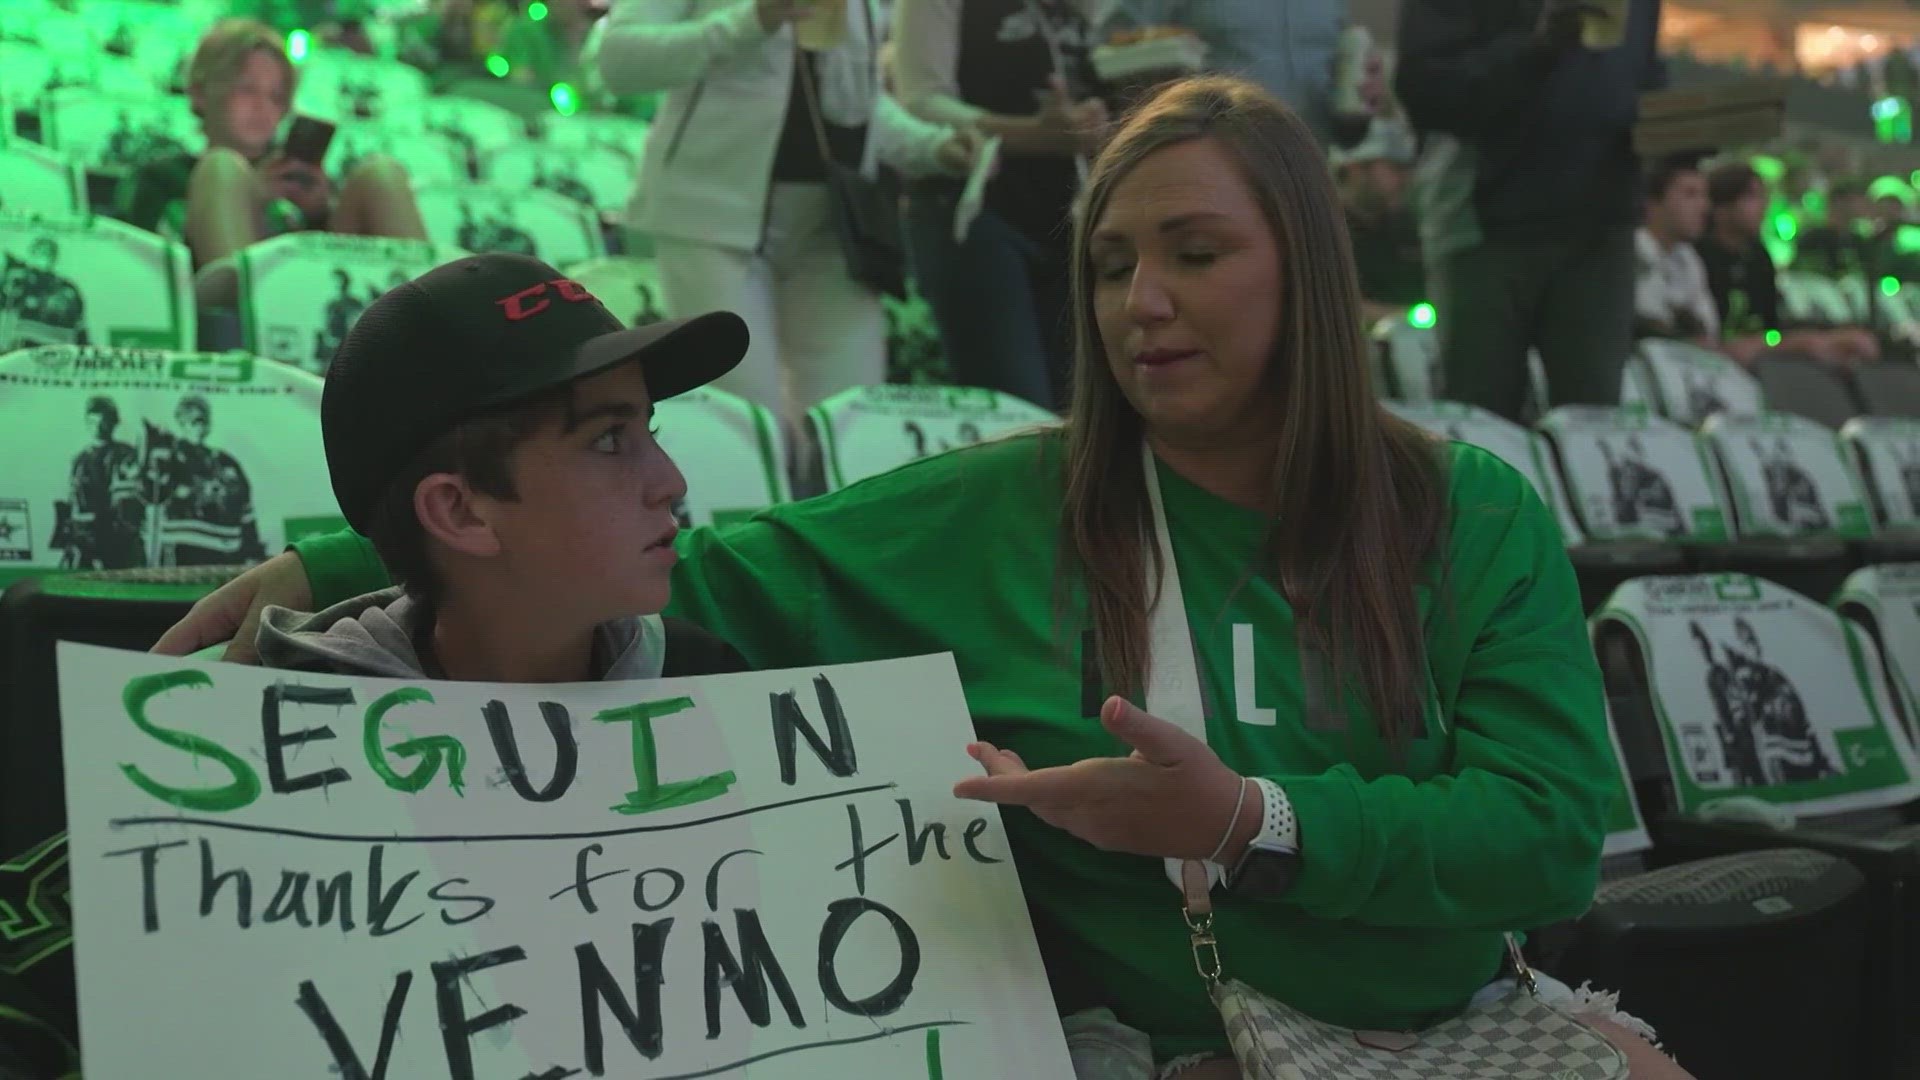 An 11-year-old boy started a lemonade stand to raise money for playoff tickets. After falling short of his goal, Tyler Seguin stepped in to help cover the cost.